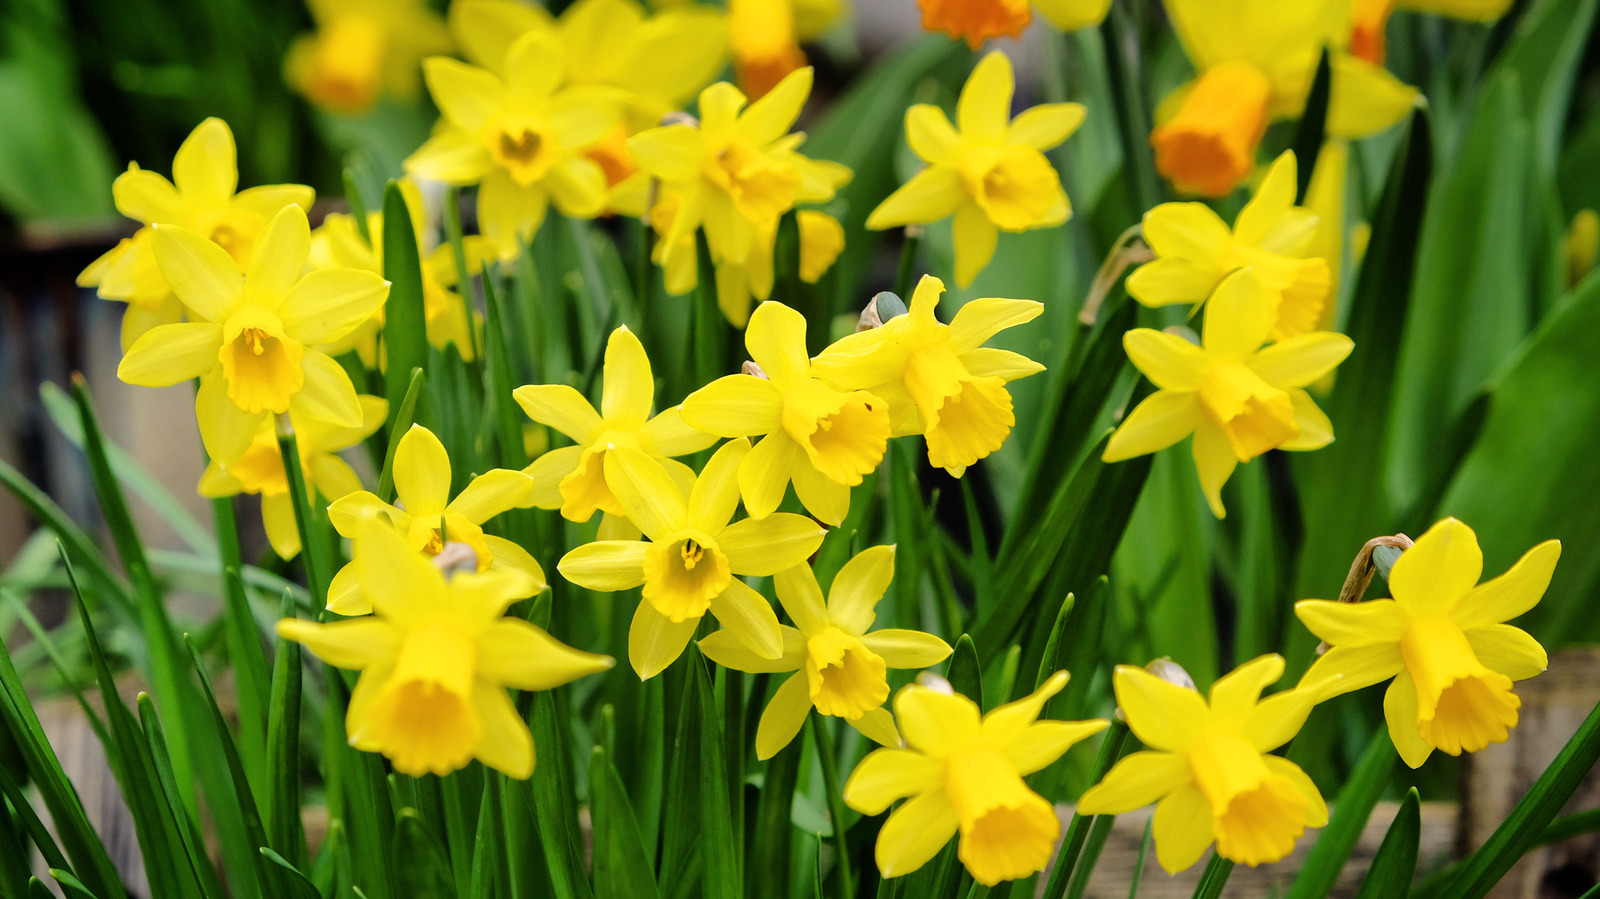 How To Remove Daffodils If They’re Taking Over Your Garden